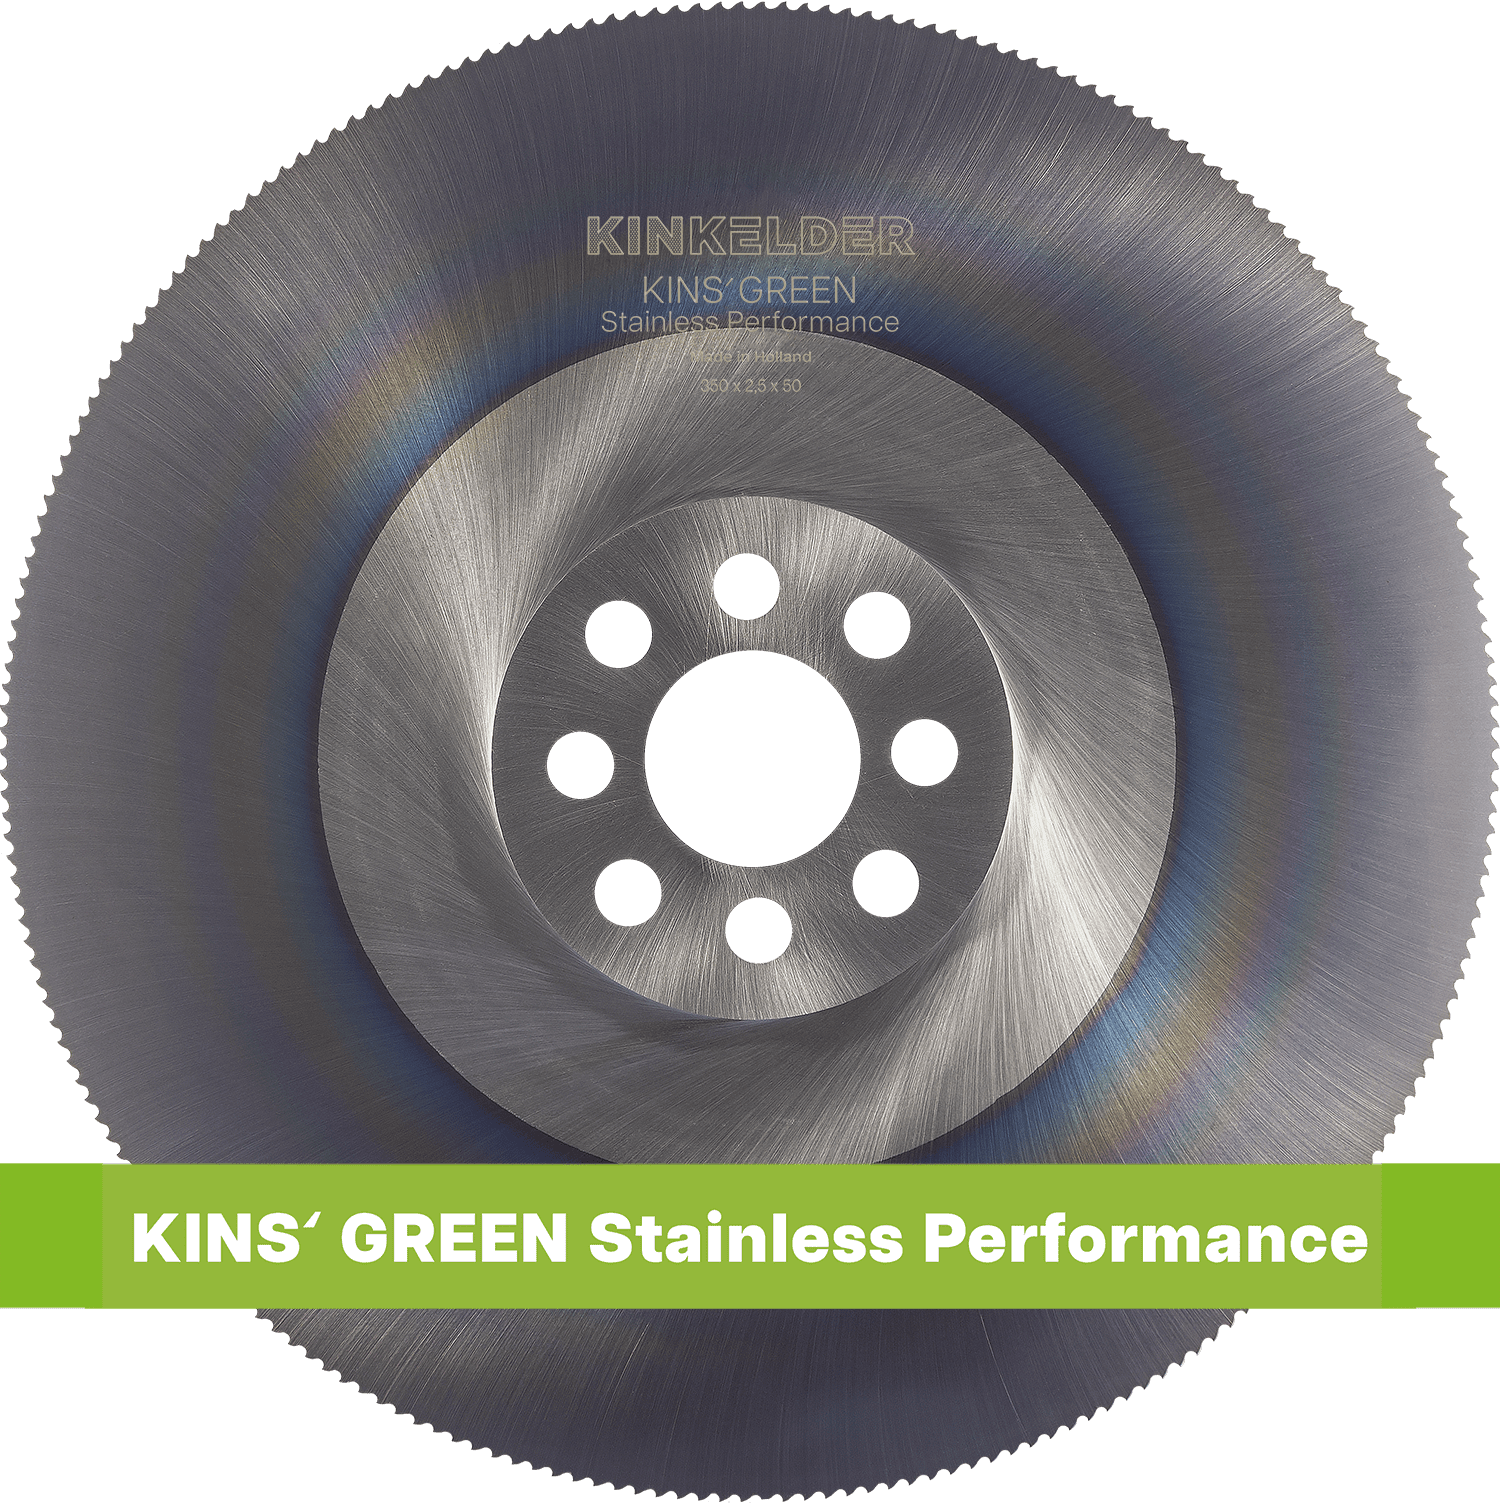 KINS' GREEN Stainless Performance